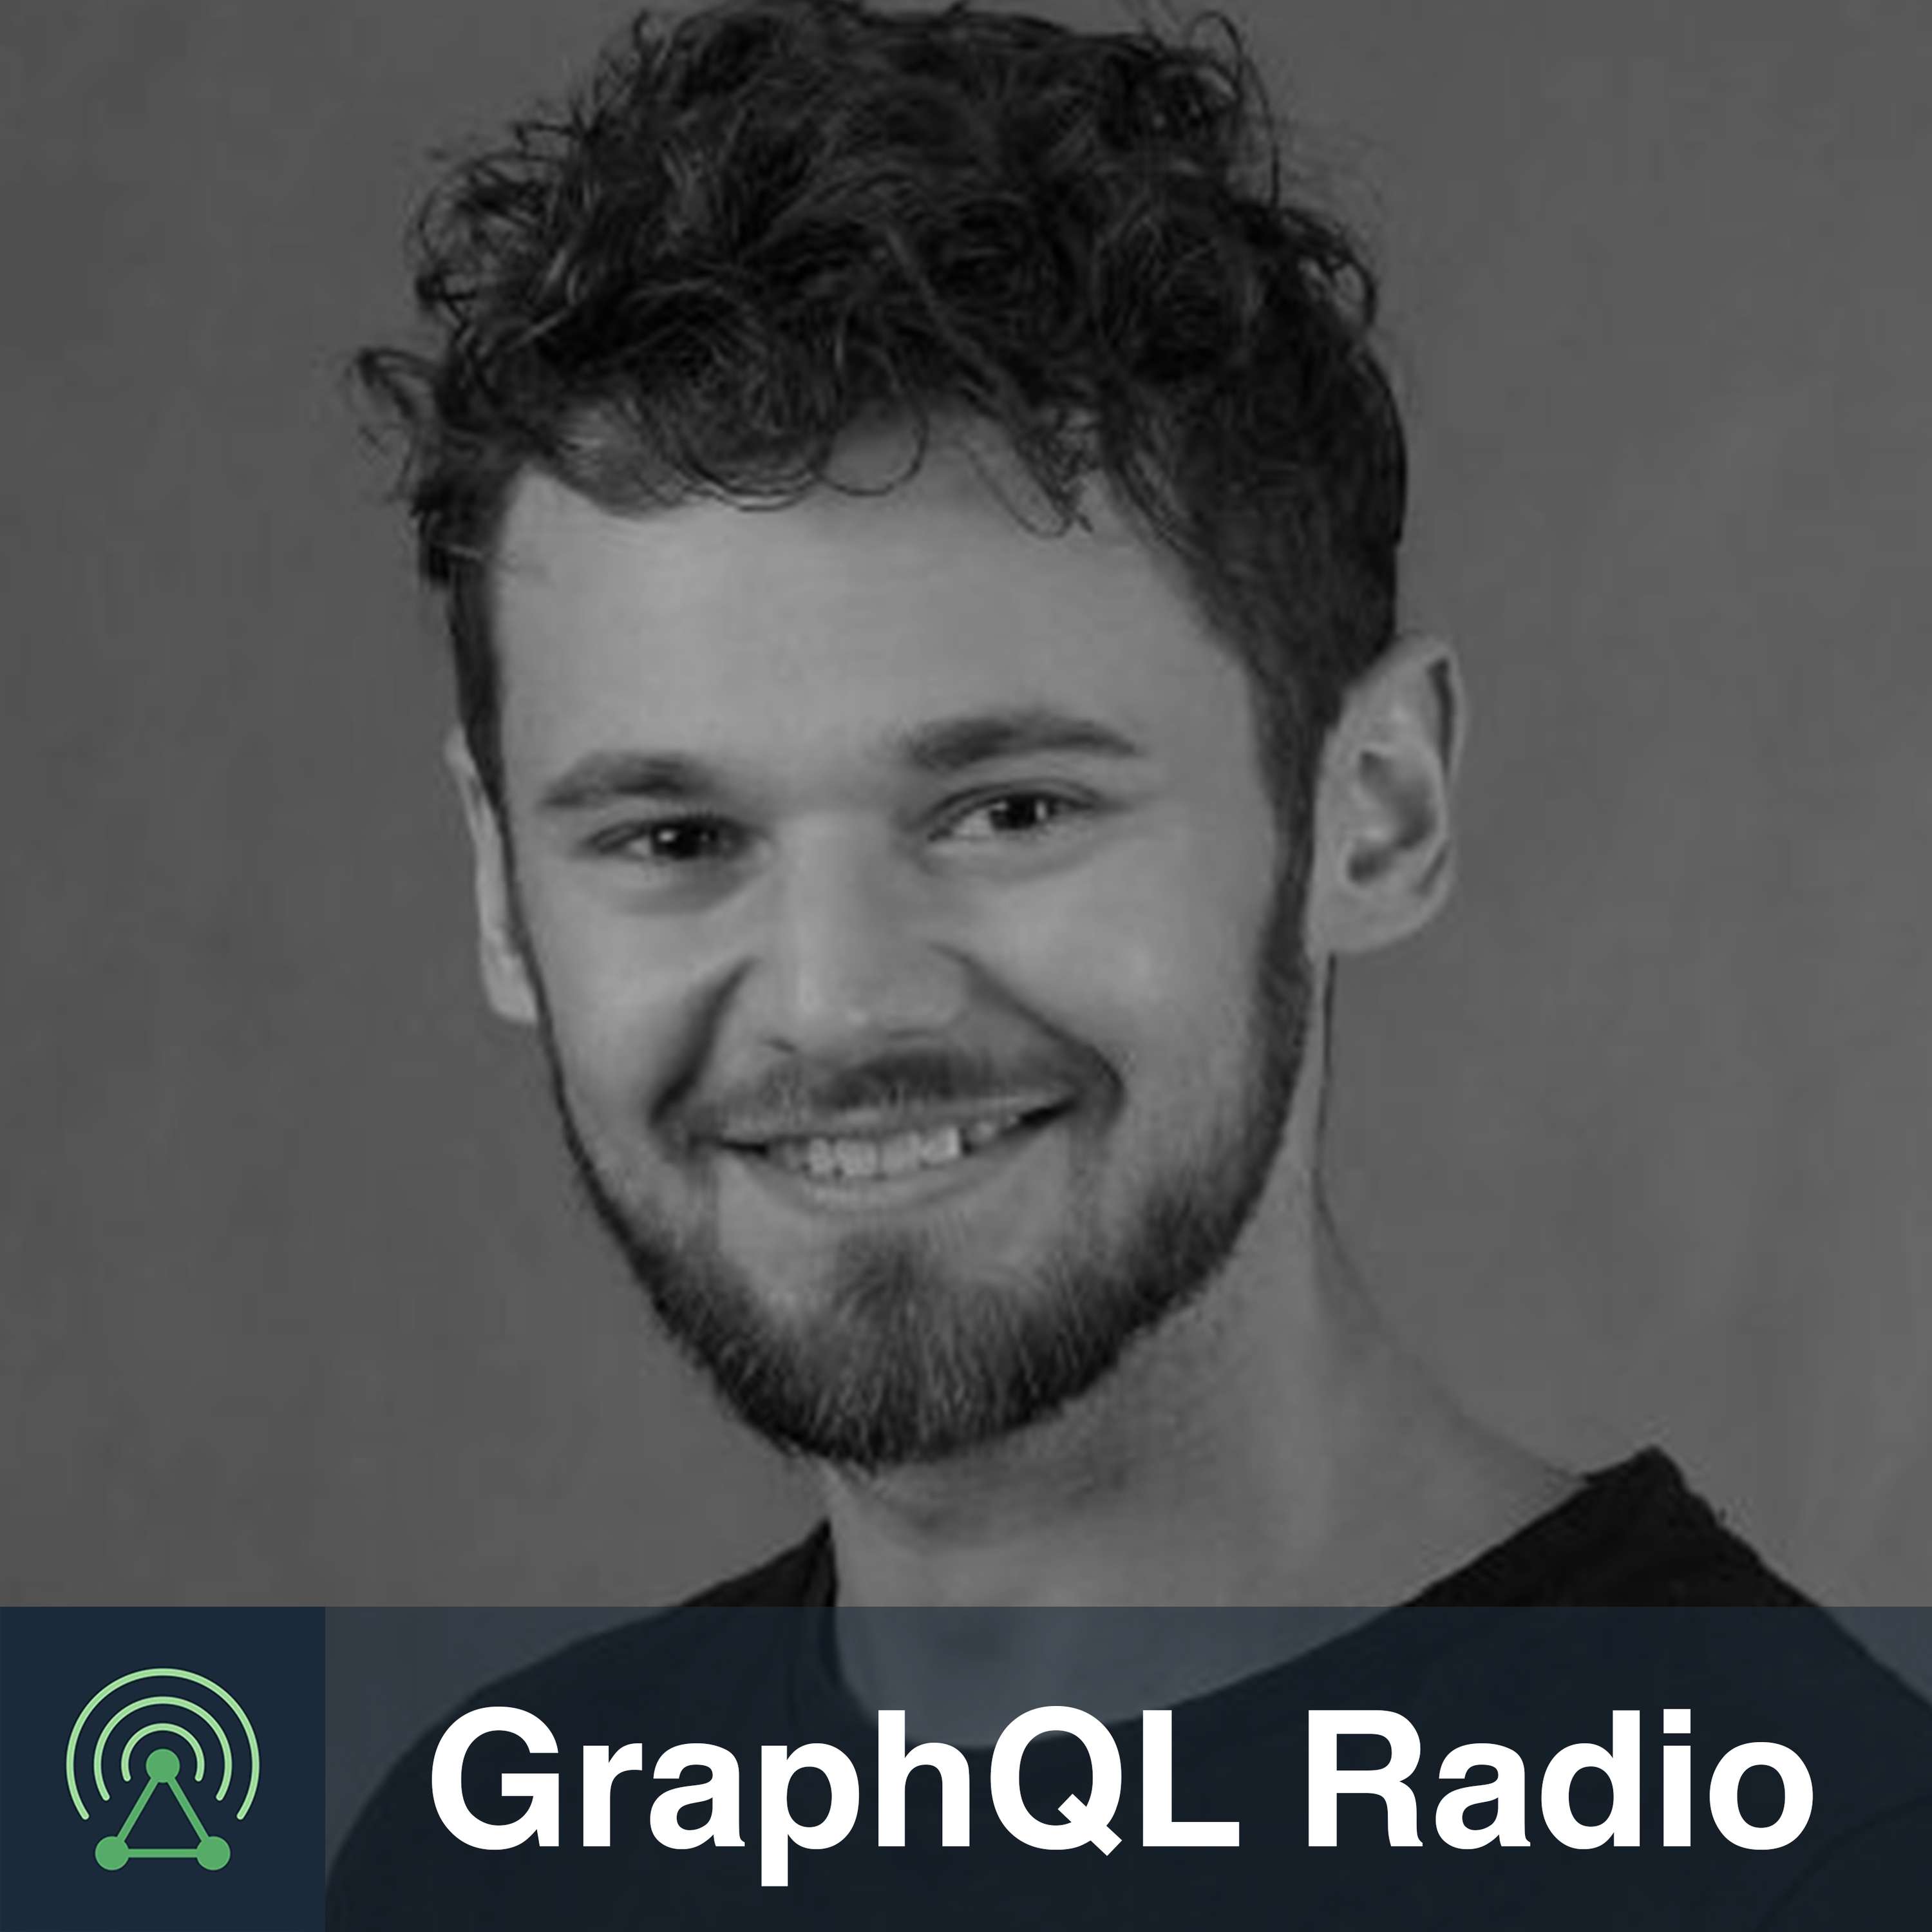 Alessandro Volpicella | Engineering Lead at Hashnode | GraphQL At Hashnode | AWS | Vercel | Developer Blogging | Creating Content | Getting Into Tech | Apprenticeship | Studying Computer Science | Dat